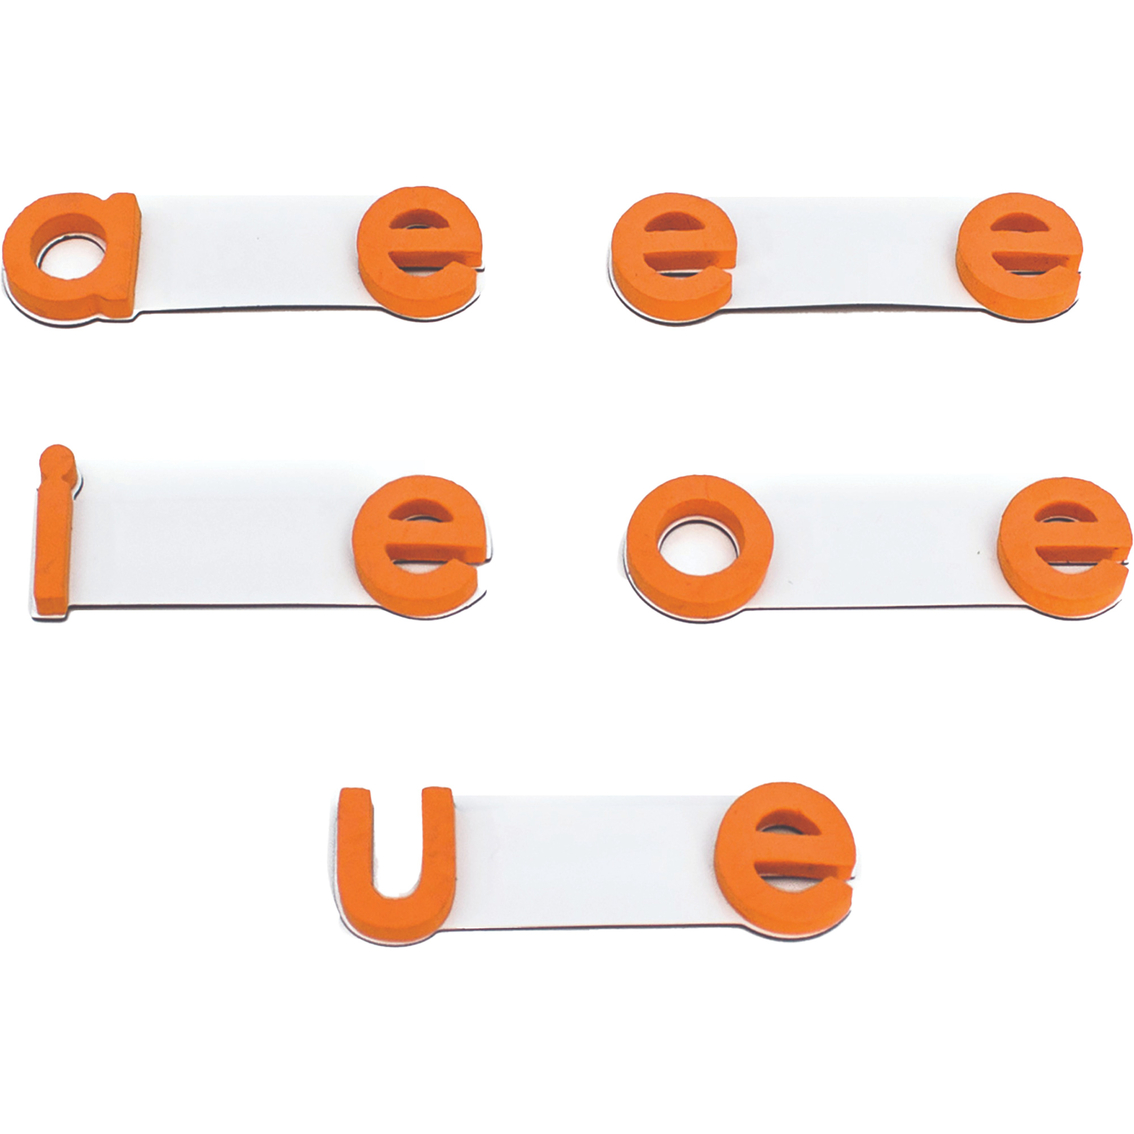 Junior Learning Rainbow Vowels Magnetic Activities Learning Set - Image 3 of 3